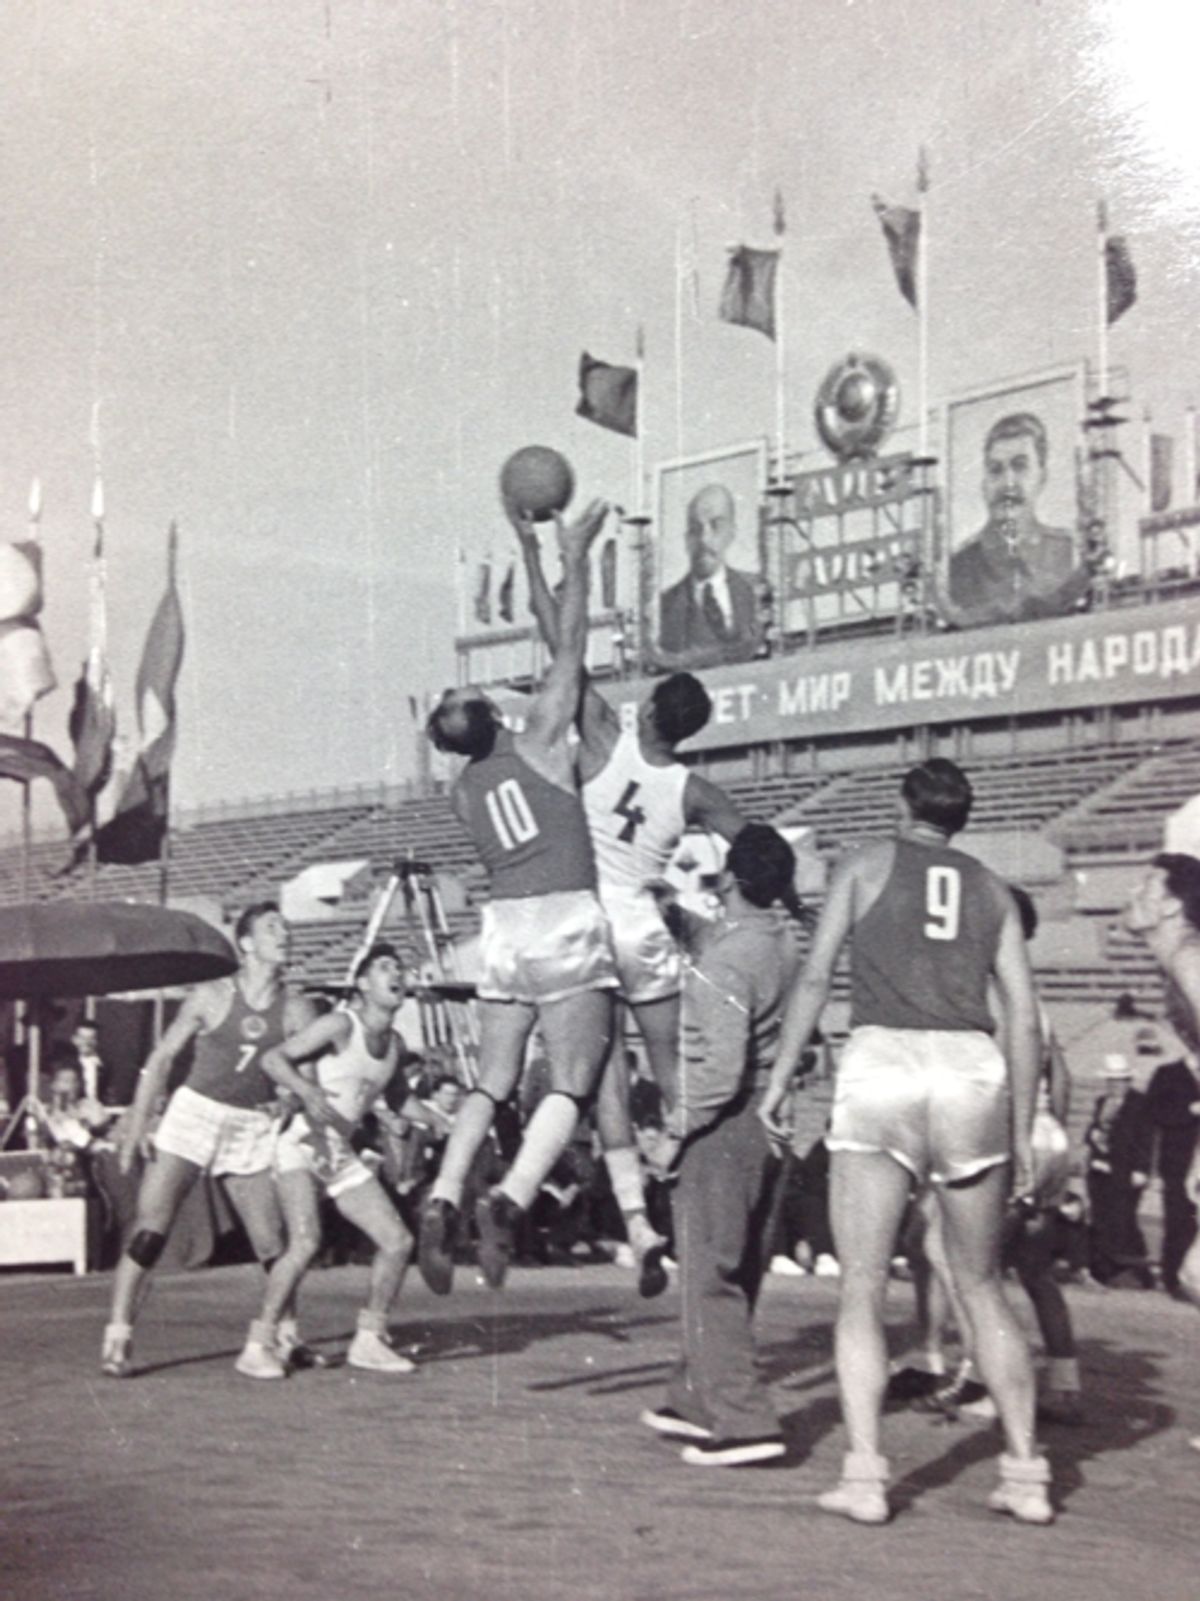 Ofri, #4, tipping off, May 1953, Moscow